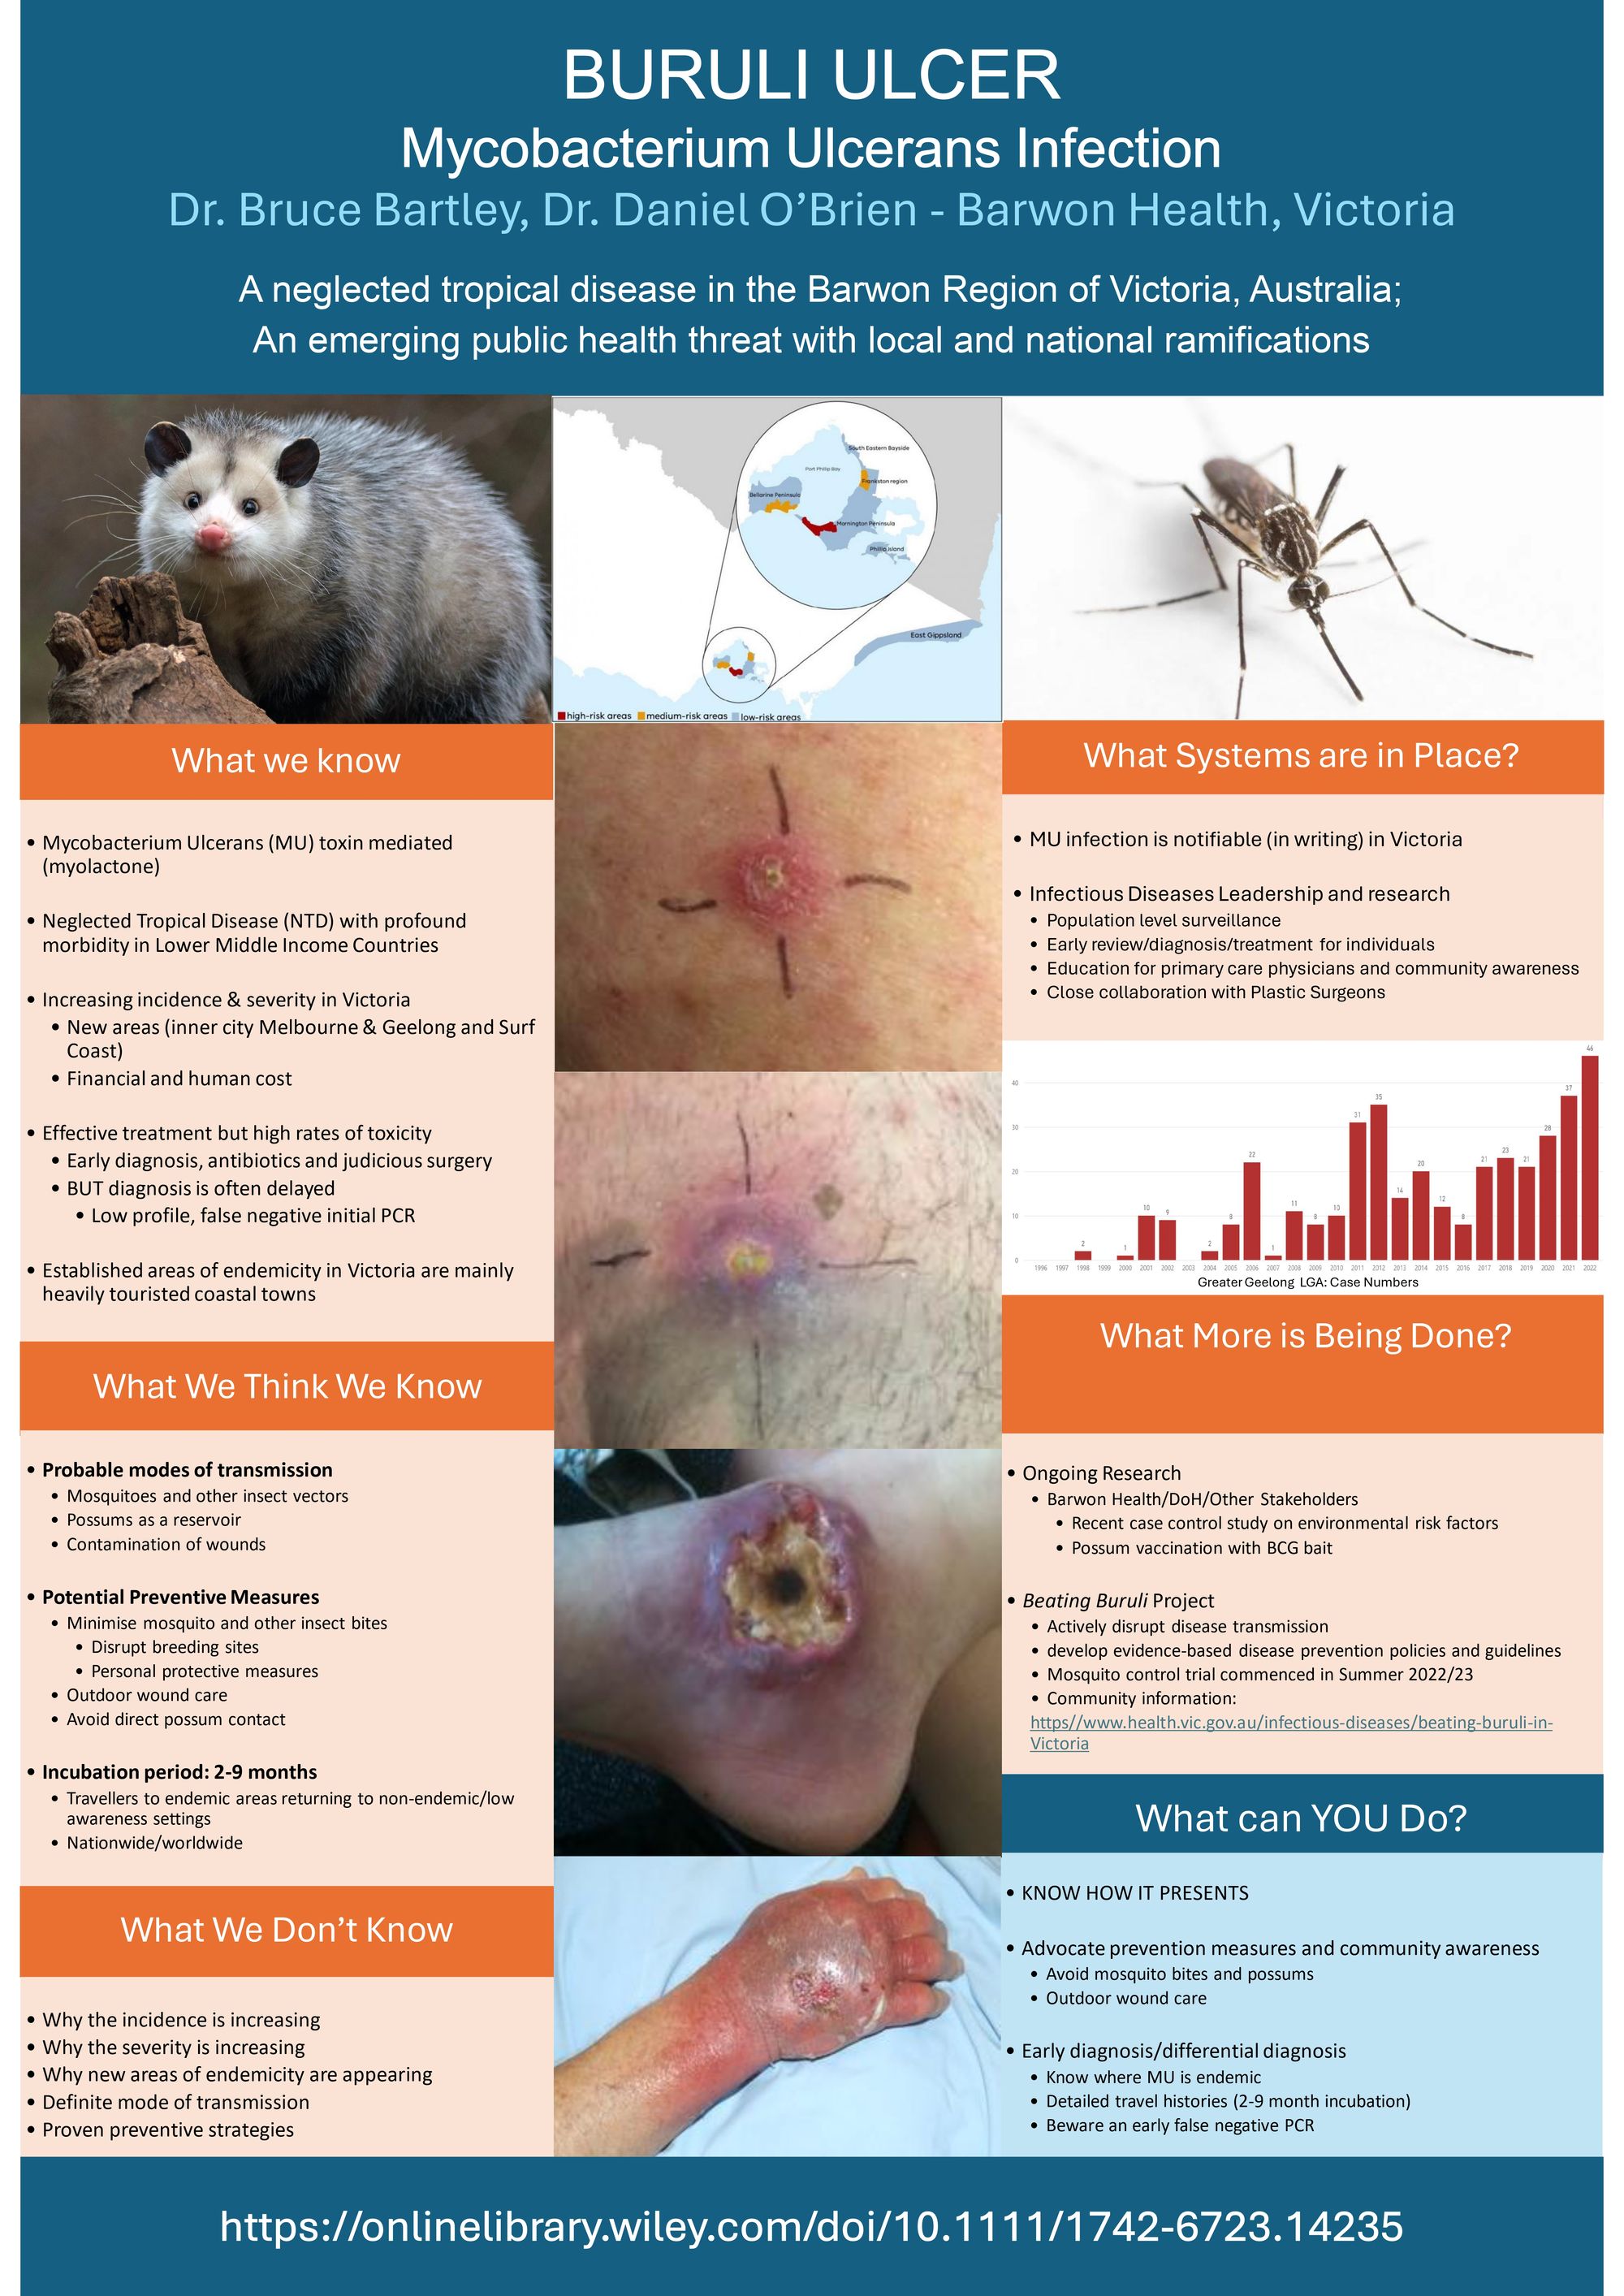 Buruli ulcer – A neglected tropical disease in the Barwon region of Victoria, Australia: An emerging public health threat with local and national ramifications